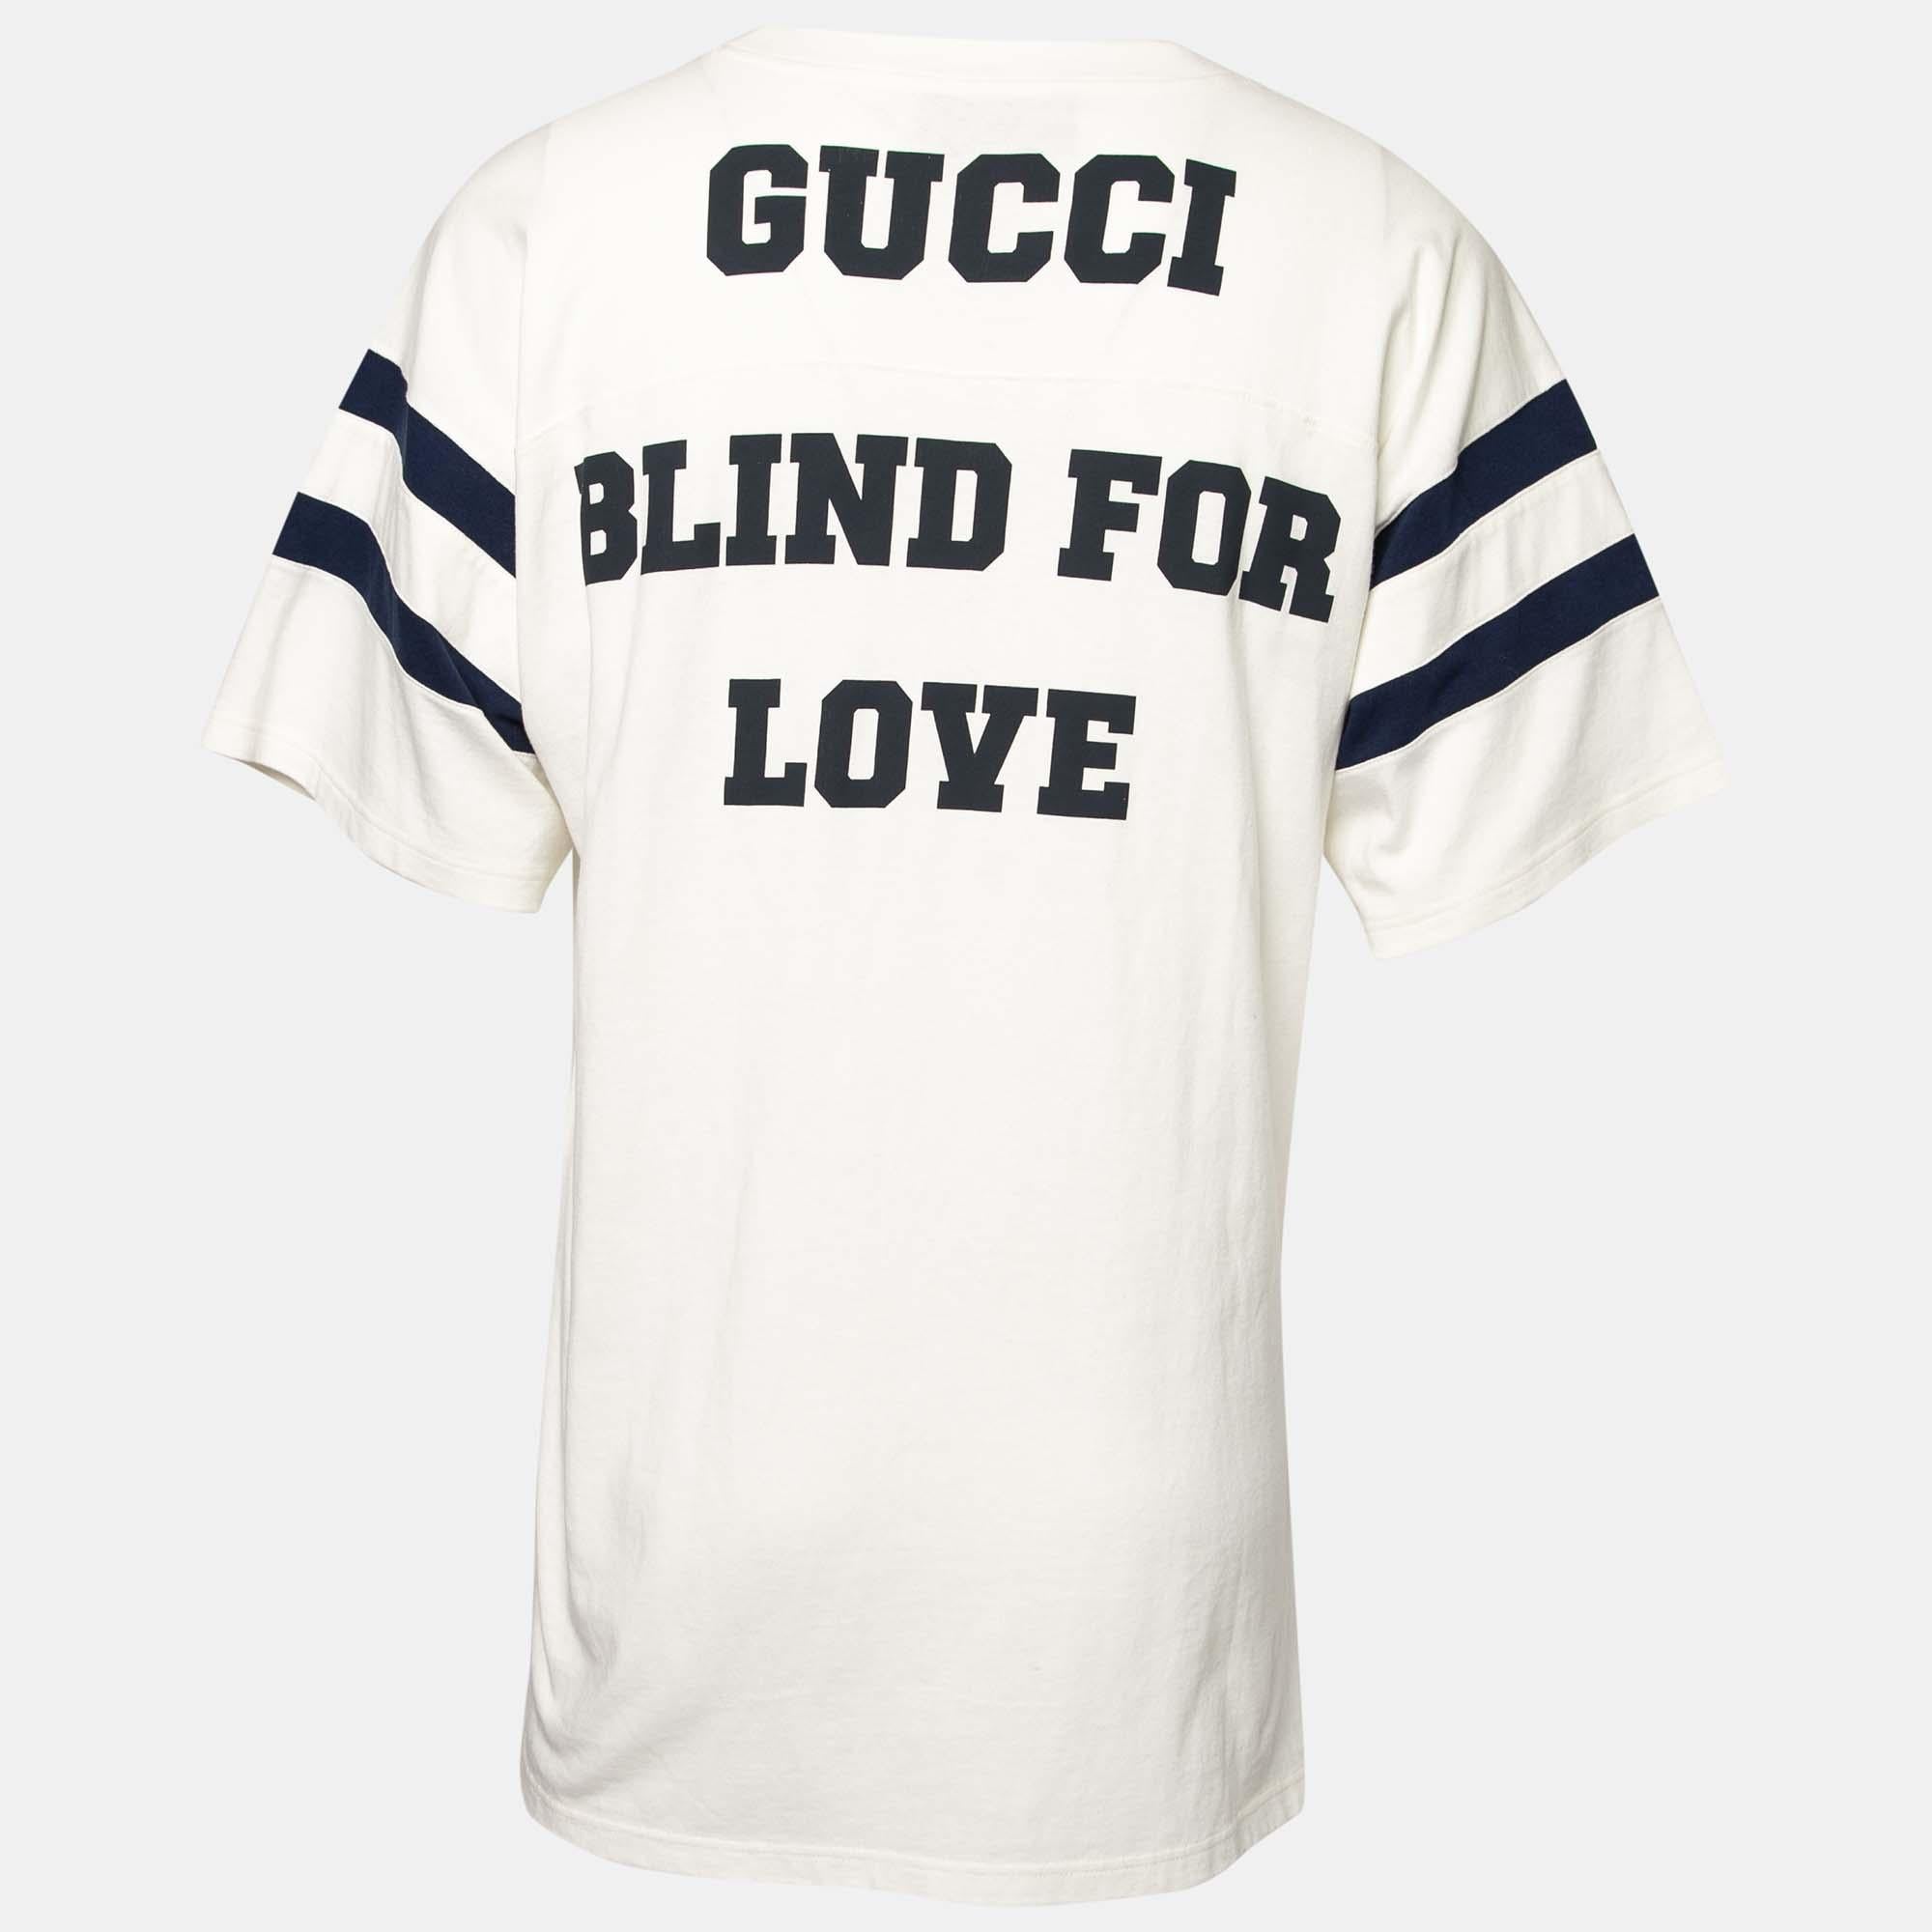 Gucci brings you a simple t-shirt elevated by the label's signature elements on the front and back. It has been tailored from cotton in a white shade and features short sleeves. Style the creation with sneakers and denim pants for a cool and casual